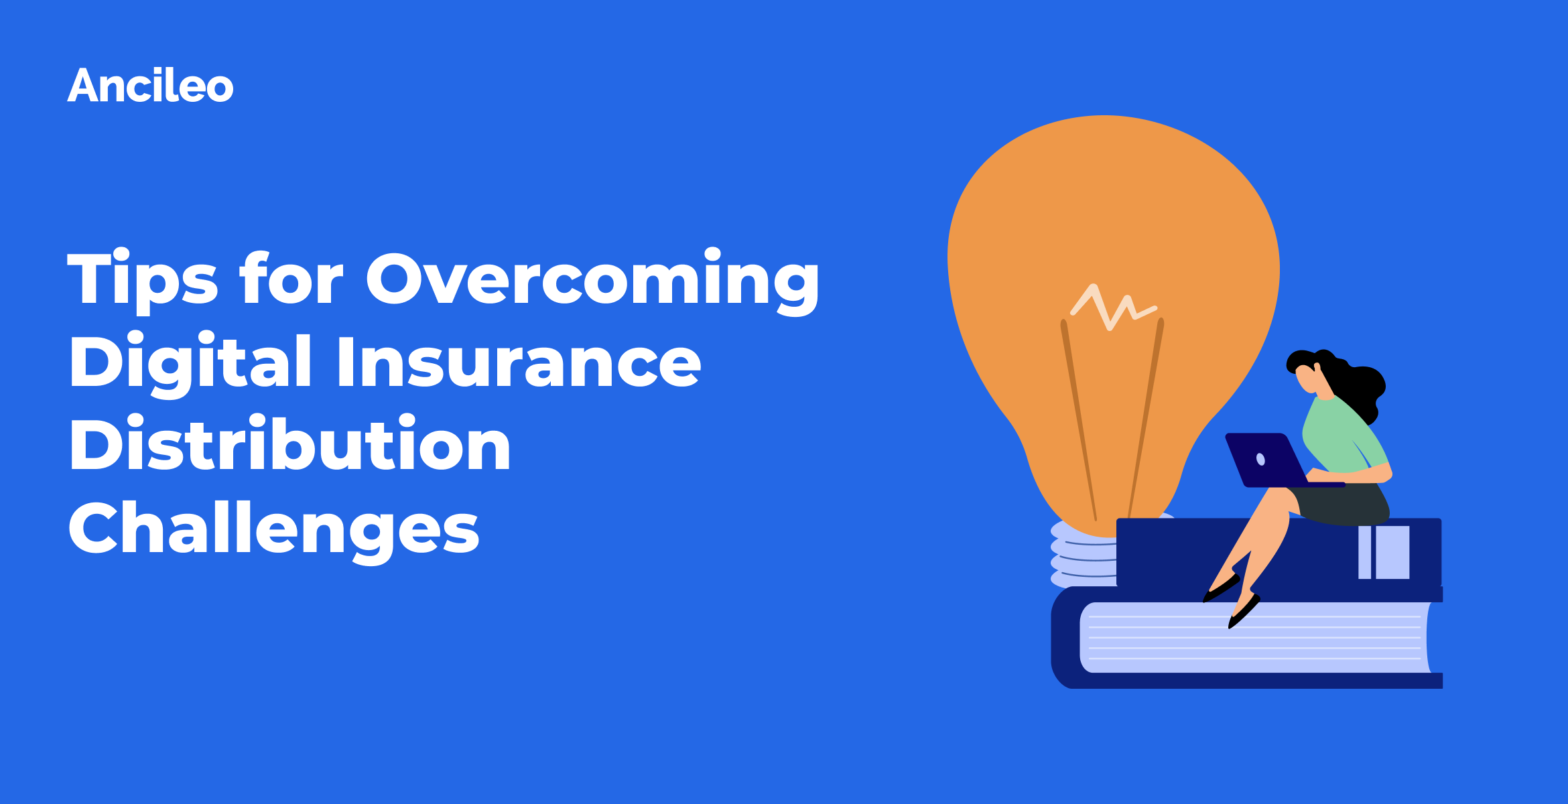 Tips for Overcoming Digital Insurance Distribution Challenges